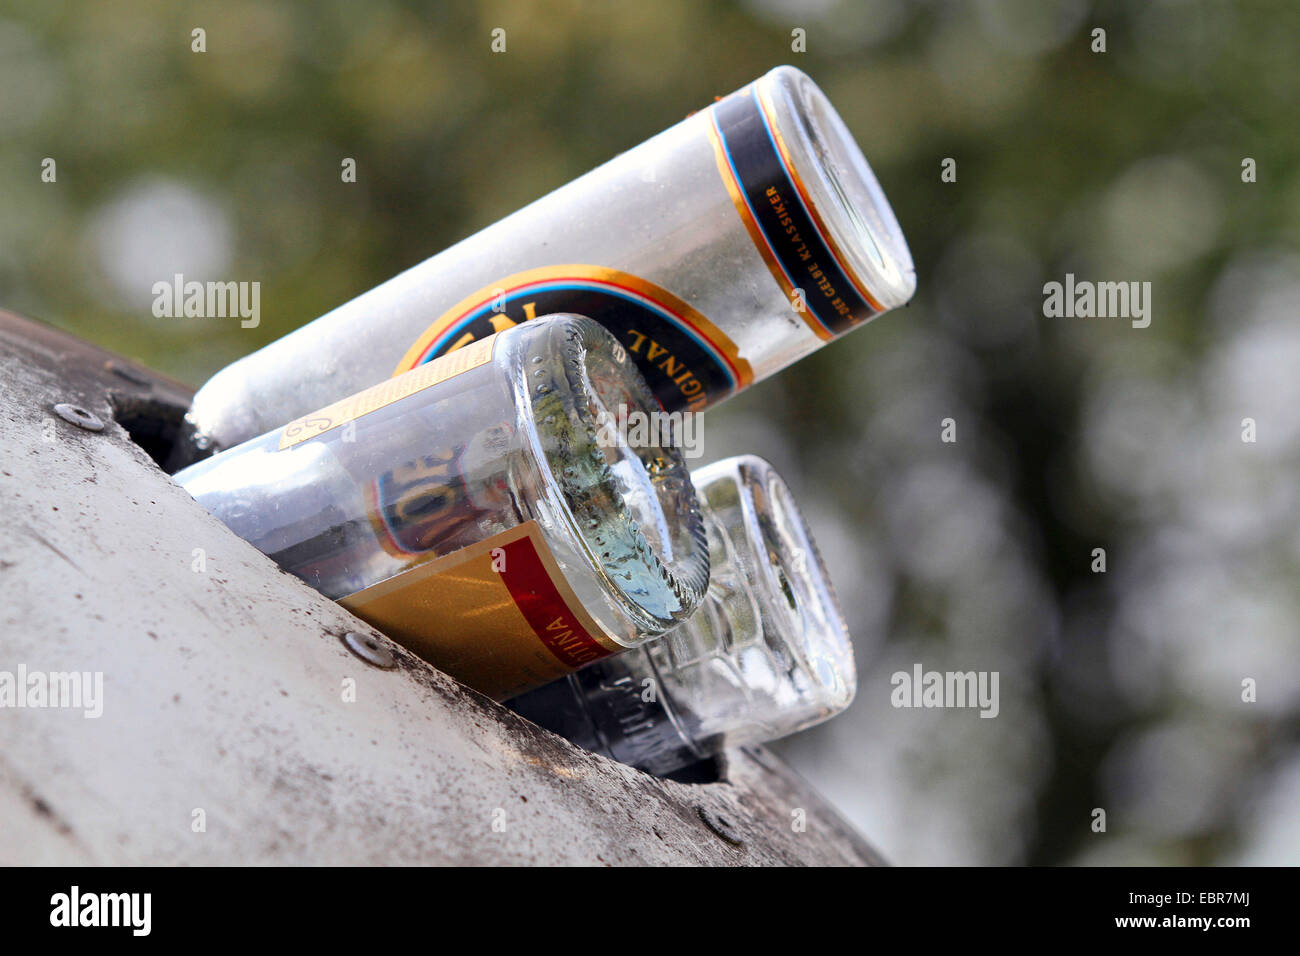 glass bottles in the opening of a bottle bank, Germany Stock Photo